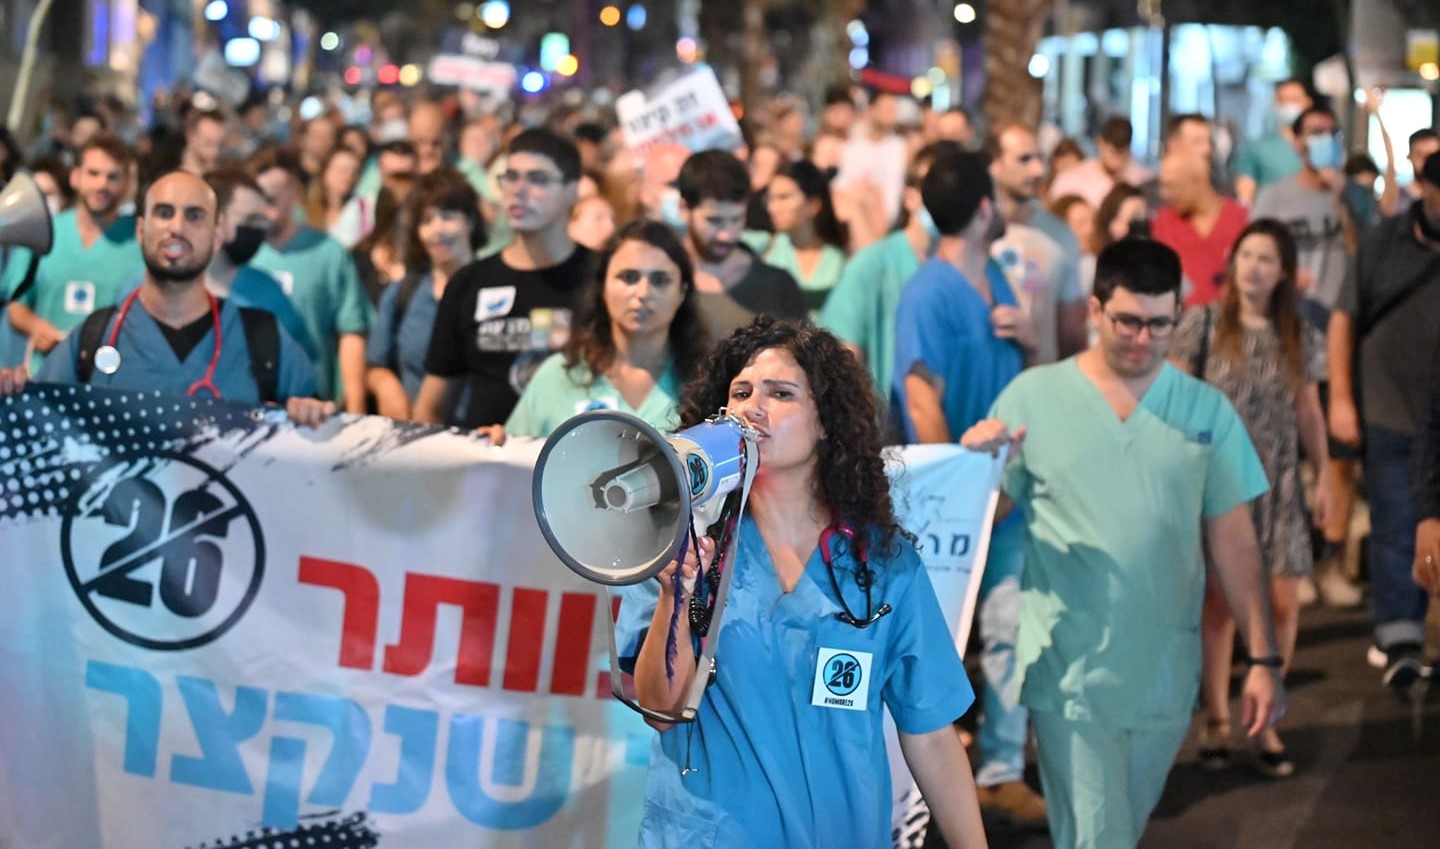 Dr. Rey Biton, head of the Mirsham union of medical residents (with the megaphone) leads the Saturday night rally held in Tel Aviv to reduce the work shift of resident physicians in hospitals.